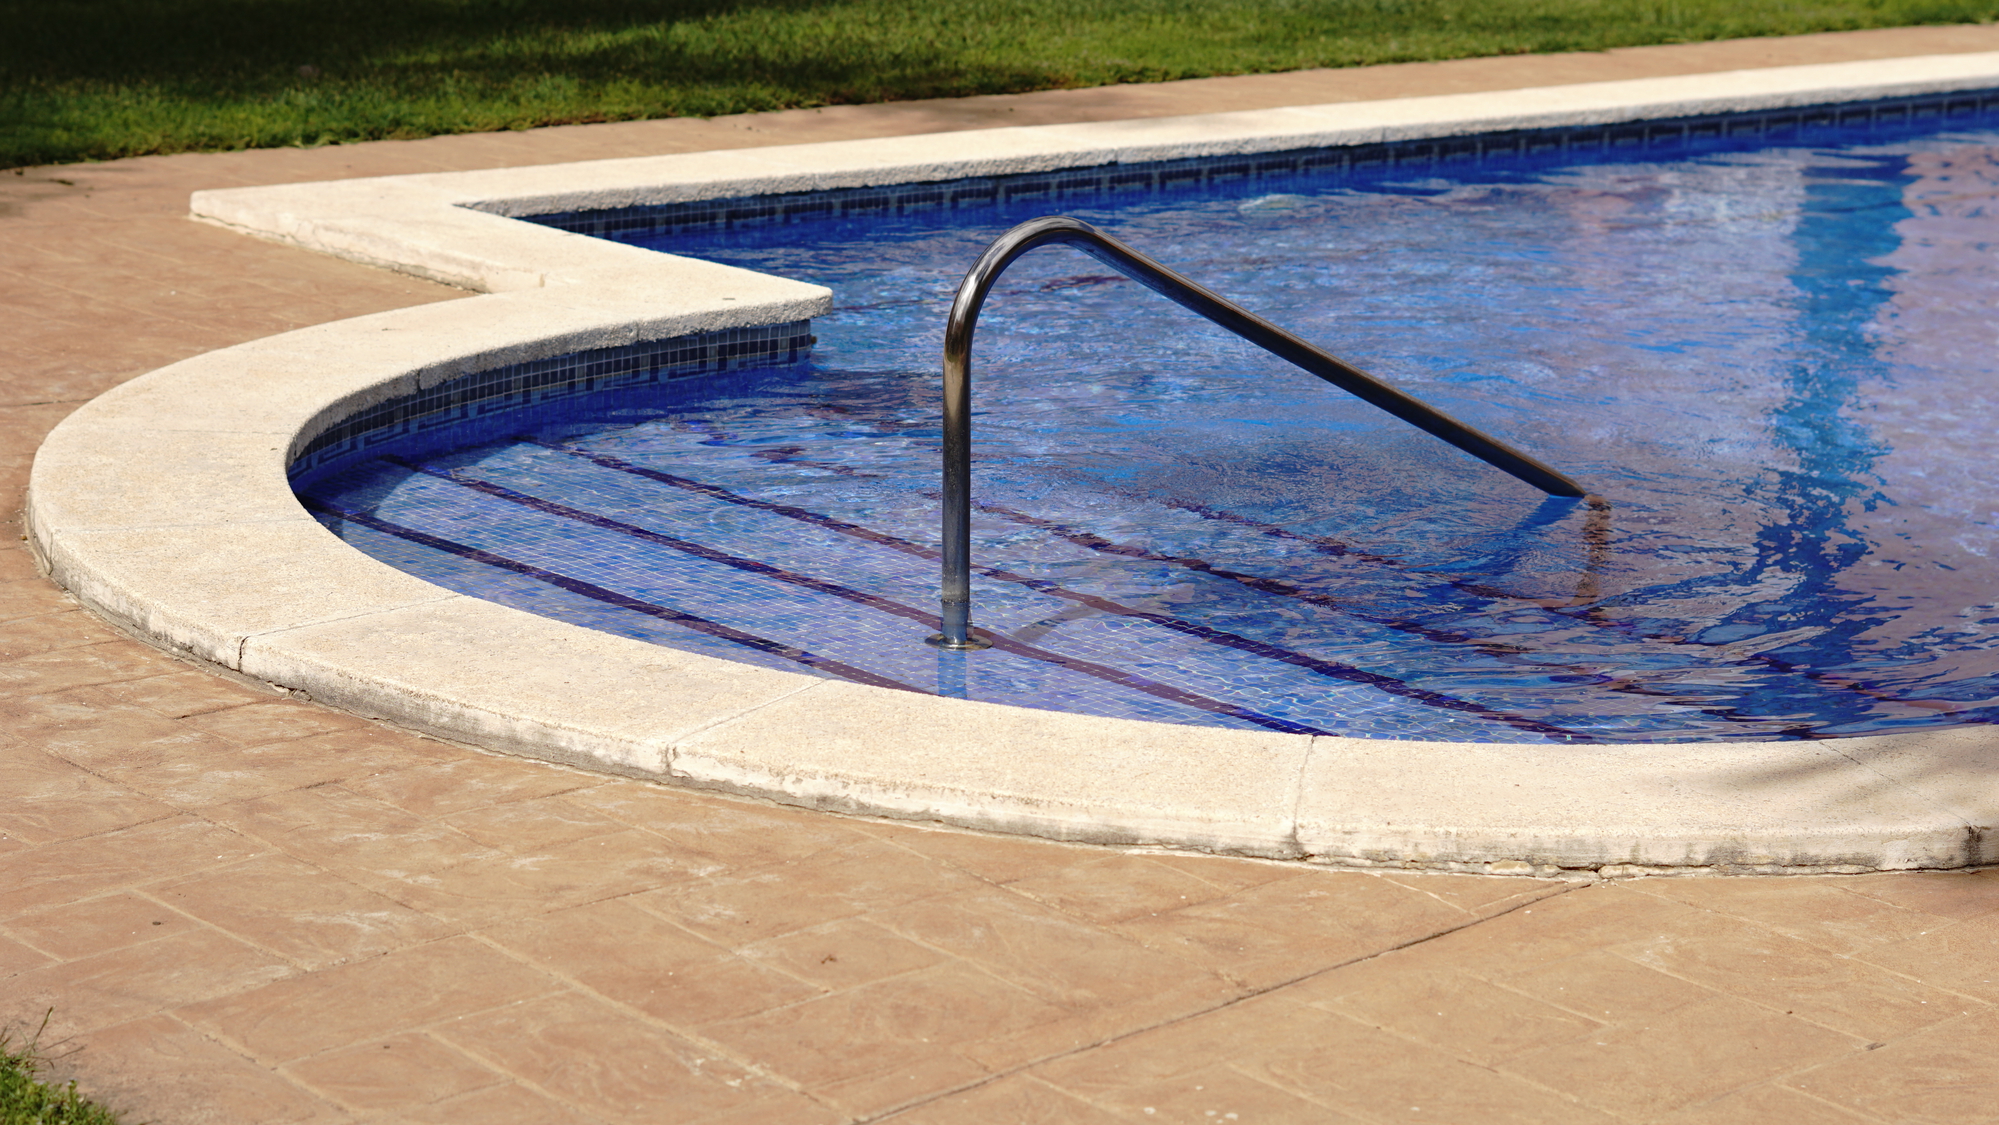 A close-up view of a swimming pool's edge with a stainless steel ladder leading into the clear, shimmering blue water